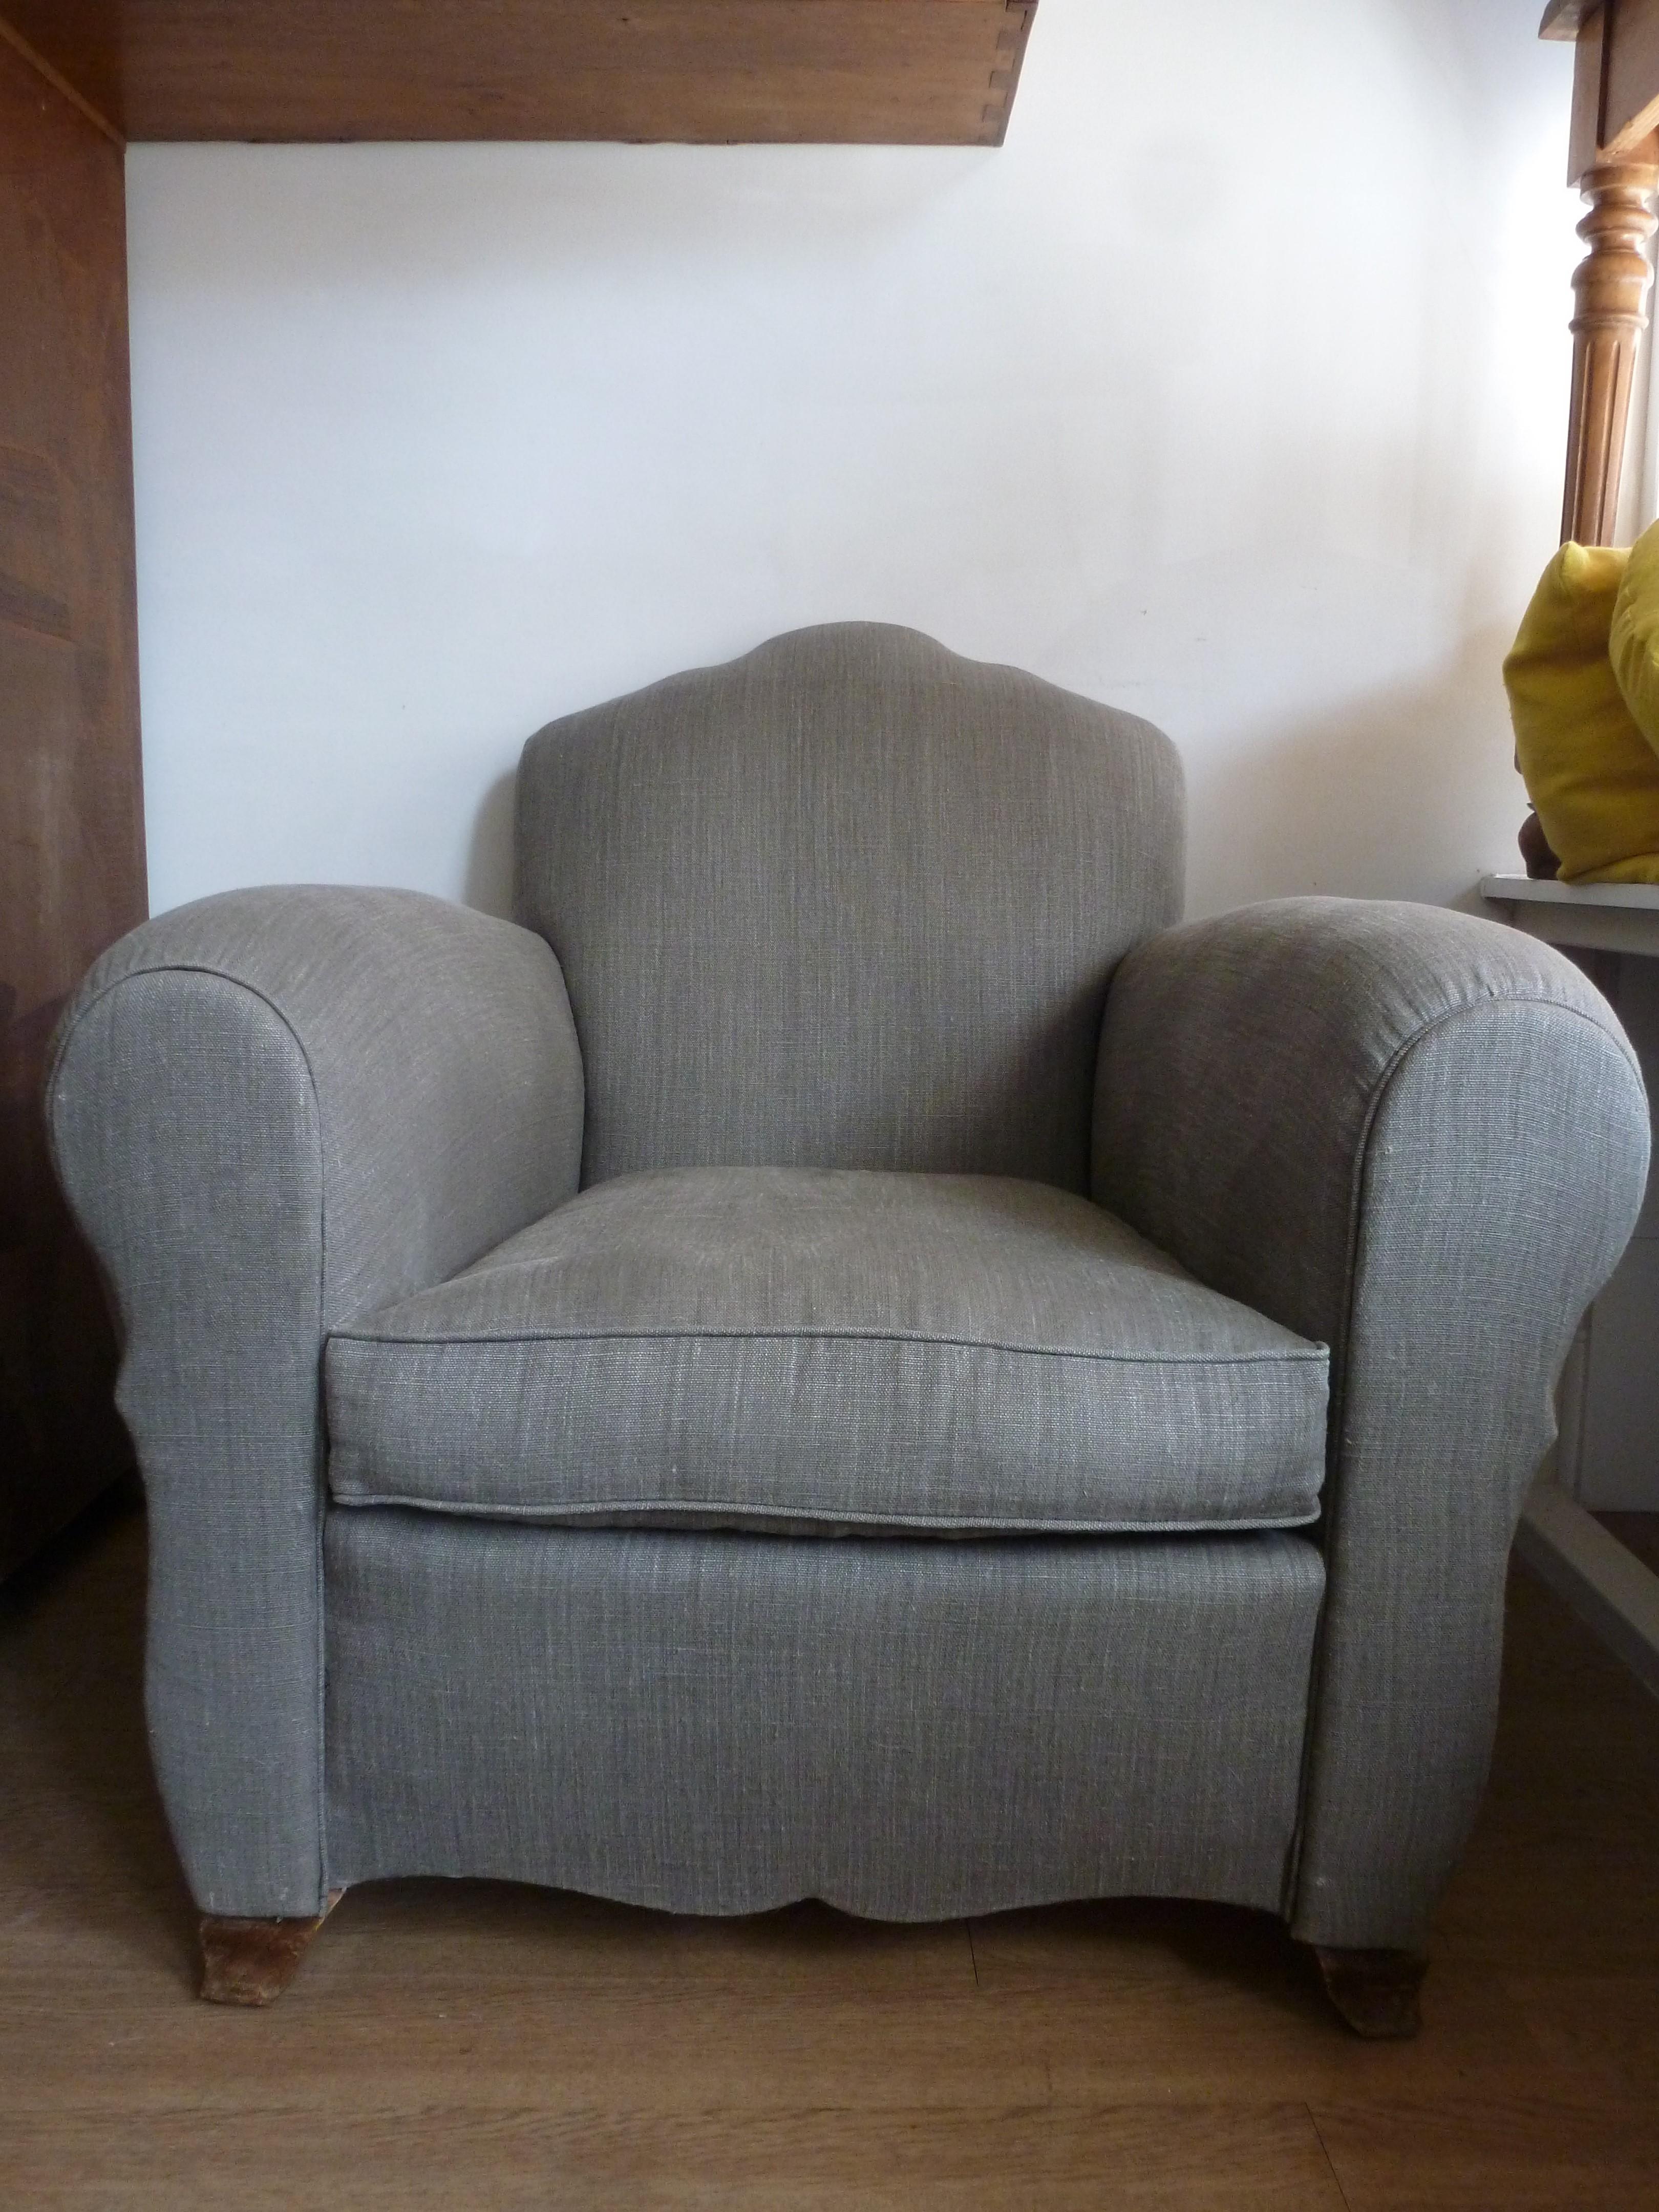 Mid-20th Century Iconic 1940 French Art Deco Club Chair Armchair Re-Upholstered Grey French Linen For Sale